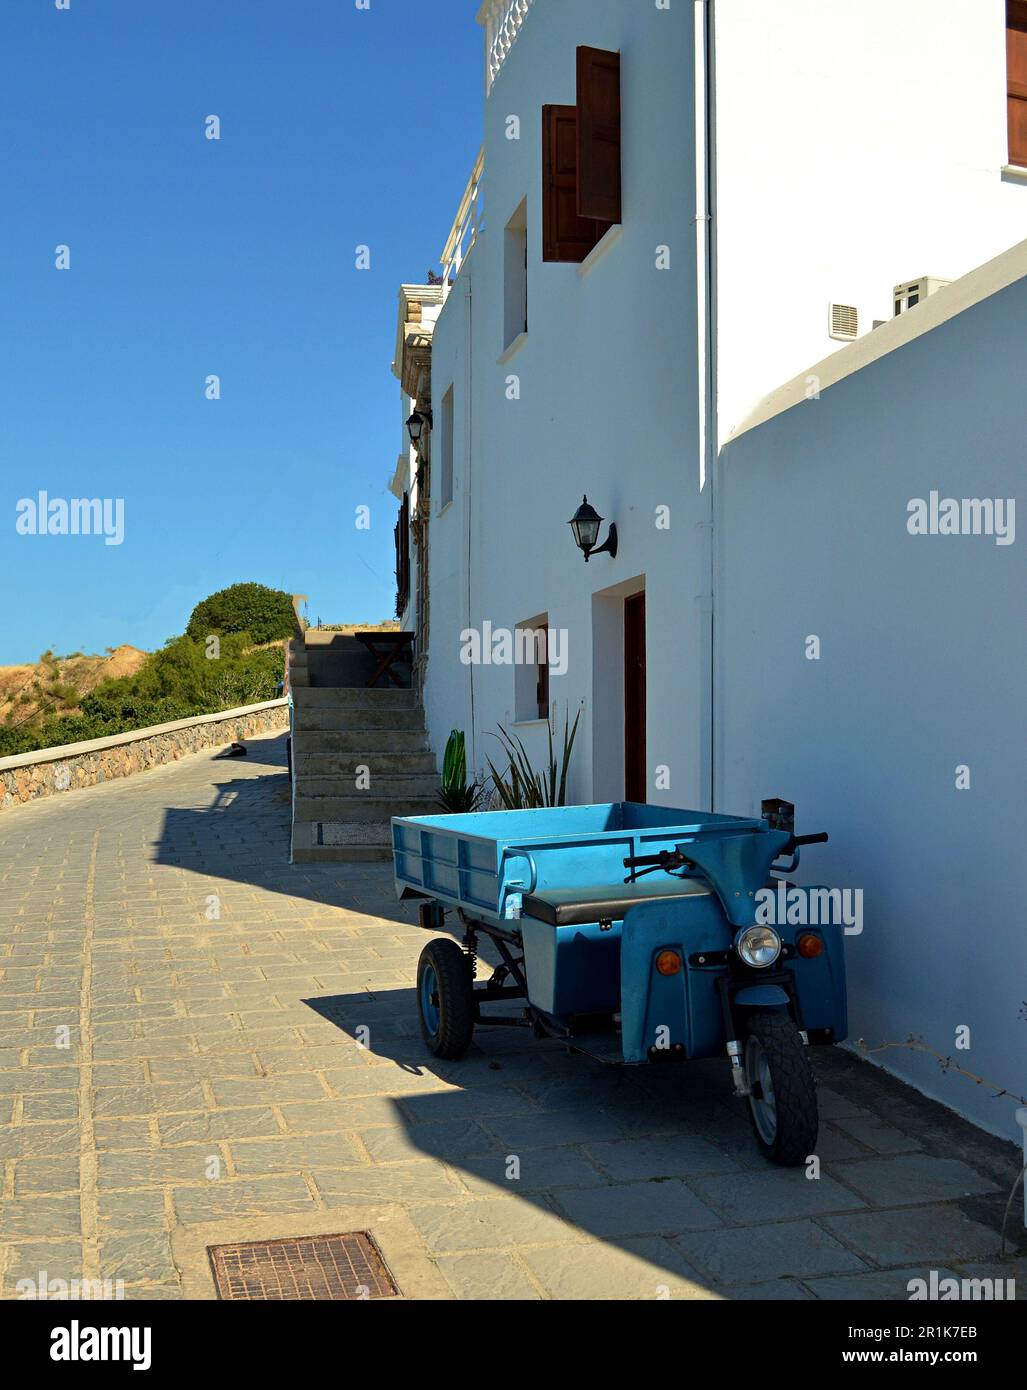 A blue old motorcycle with a sidecar is parked on a village street in Lindos. Near the white walls of a house with wooden shutters and a door. Stock Photo